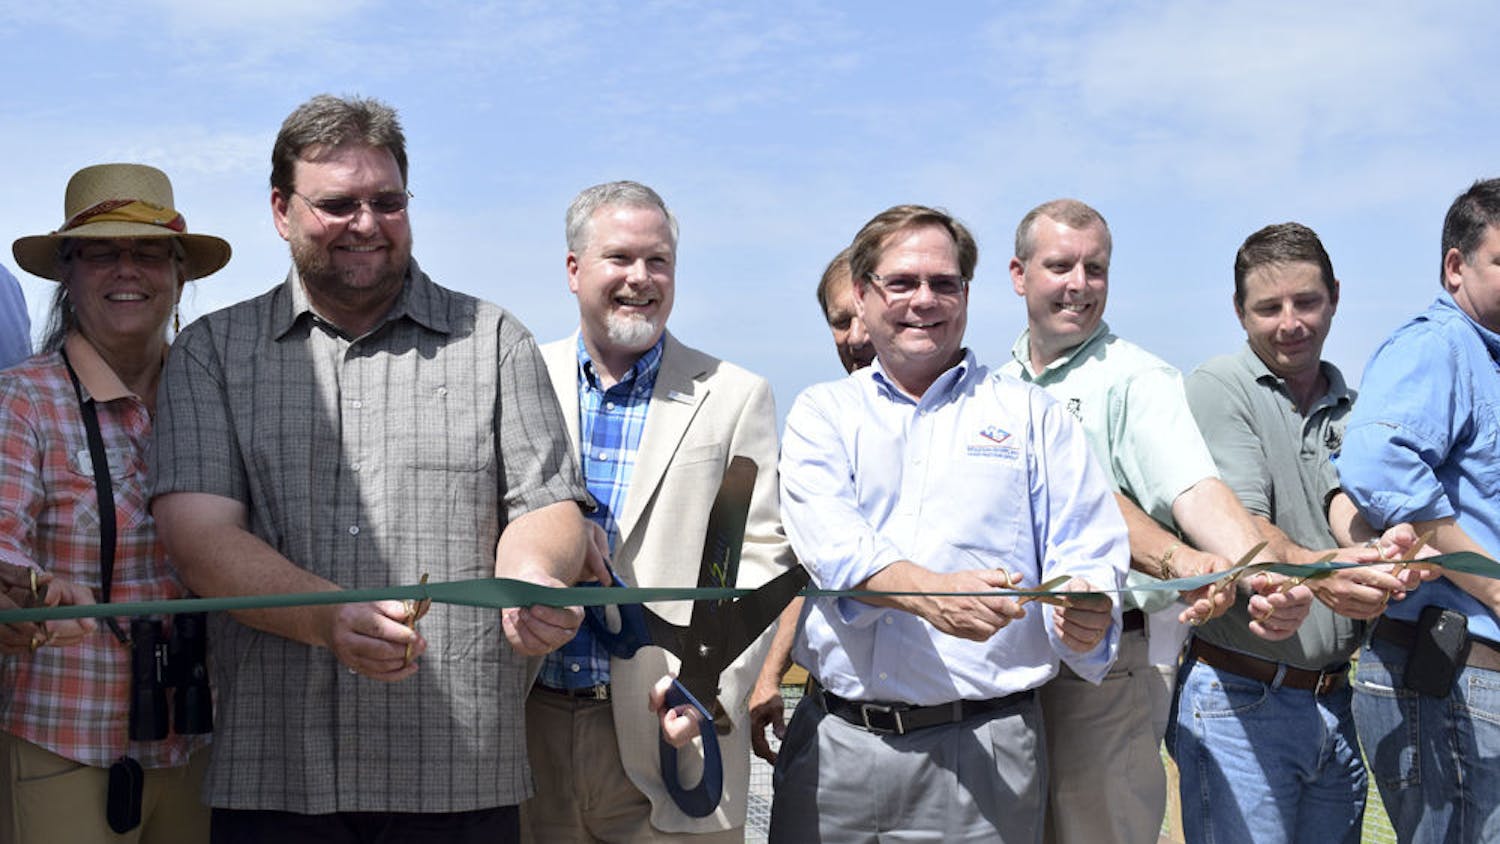 From left: Helen Warren, City Commissioner; Brad Purcell, South Florida Water Management District; Ed Braddy, Mayor; David Lewis, Wharton Smith; Chris Wynn, Florida Fish and Wildlife; Chris Keller, Wetland Solutions; and Tom Frick, FDEP, cut the ribbon at Friday's grand opening of Sweetwater Wetlands Park, located at 325 SW Williston Road.